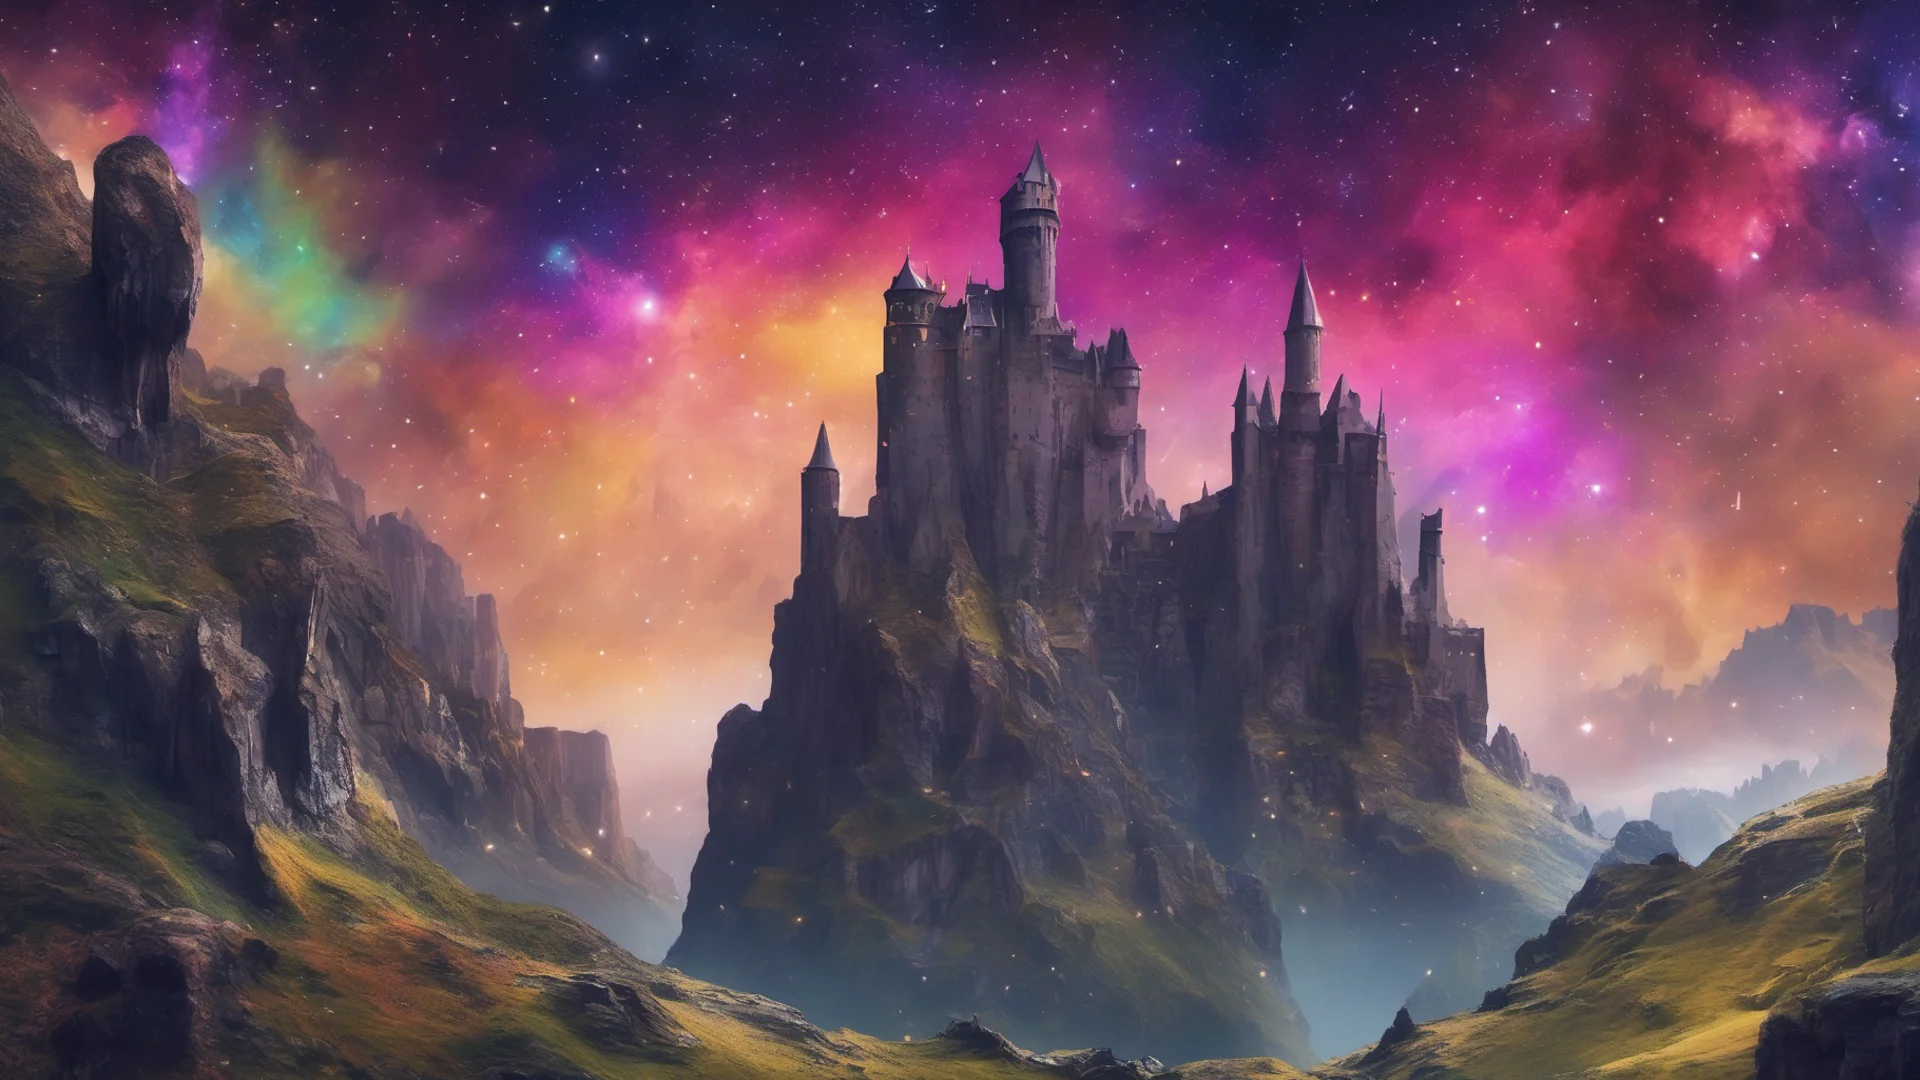 aicastle unreal landscape amazing starry colorful galaxies in sky steep cliffs overhangs  wide